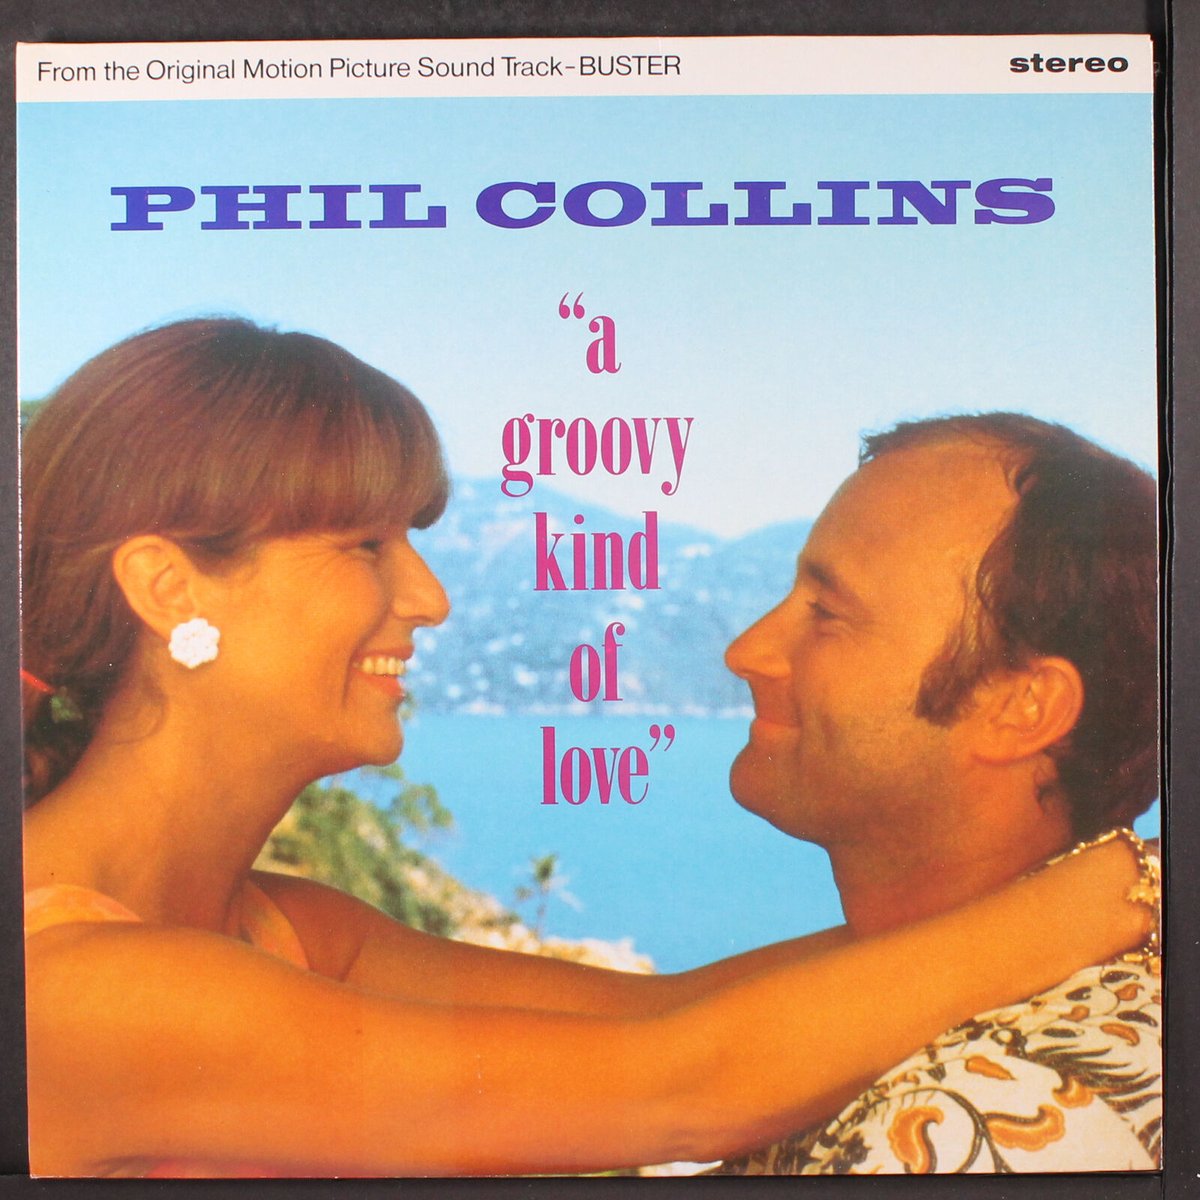 ♥️♥️ When I'm feelin' blue All I have to do Is take a look at you Then I'm not so blue When you're close to me I can feel your heart beat... Phil Collins A Groovy Kind of Love g.co/kgs/RdeMkHa 🎼 #PhilCollins testo splendido su musica di #IvanGraziani (Agnese)